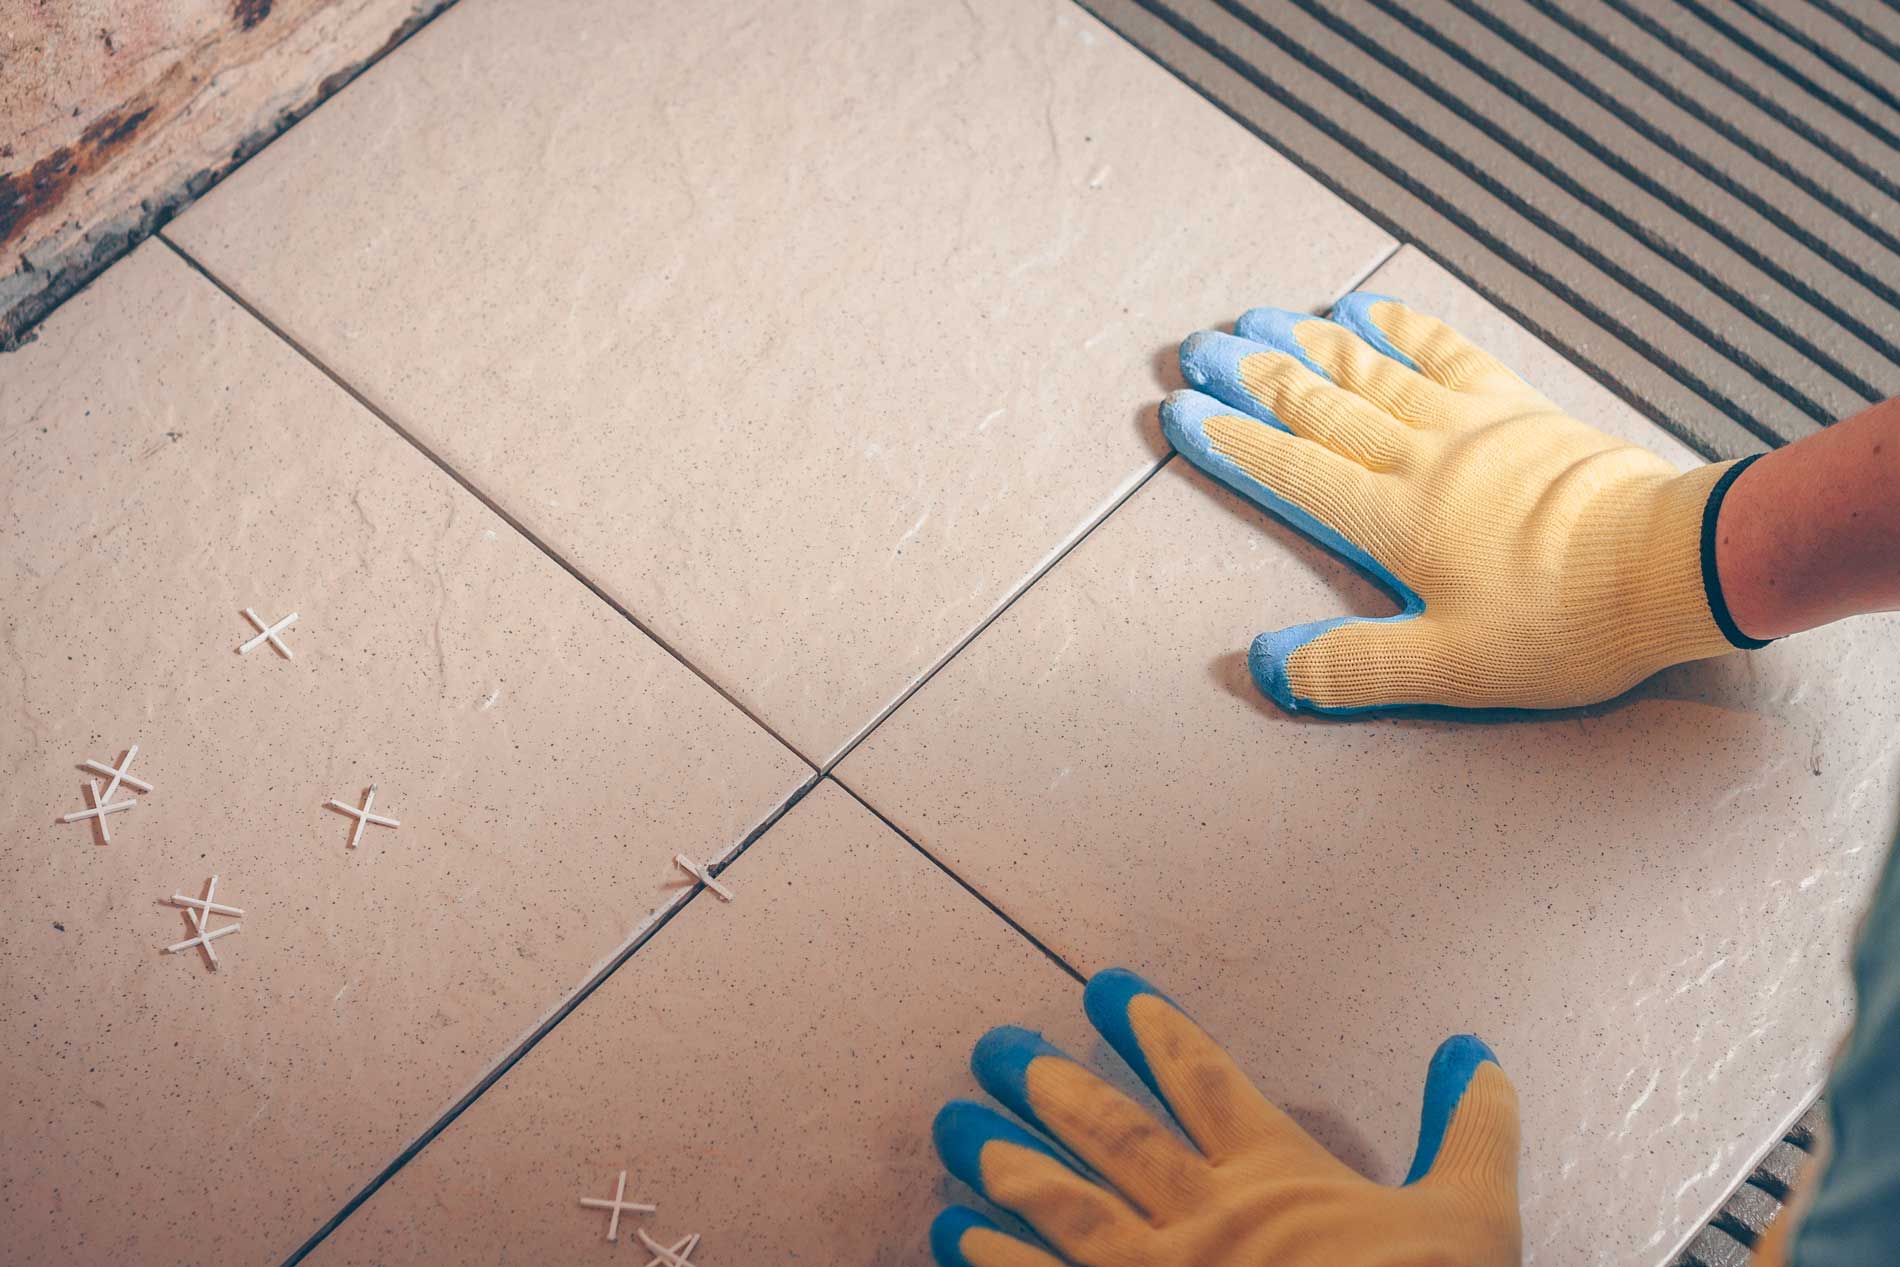 Tile Contractor